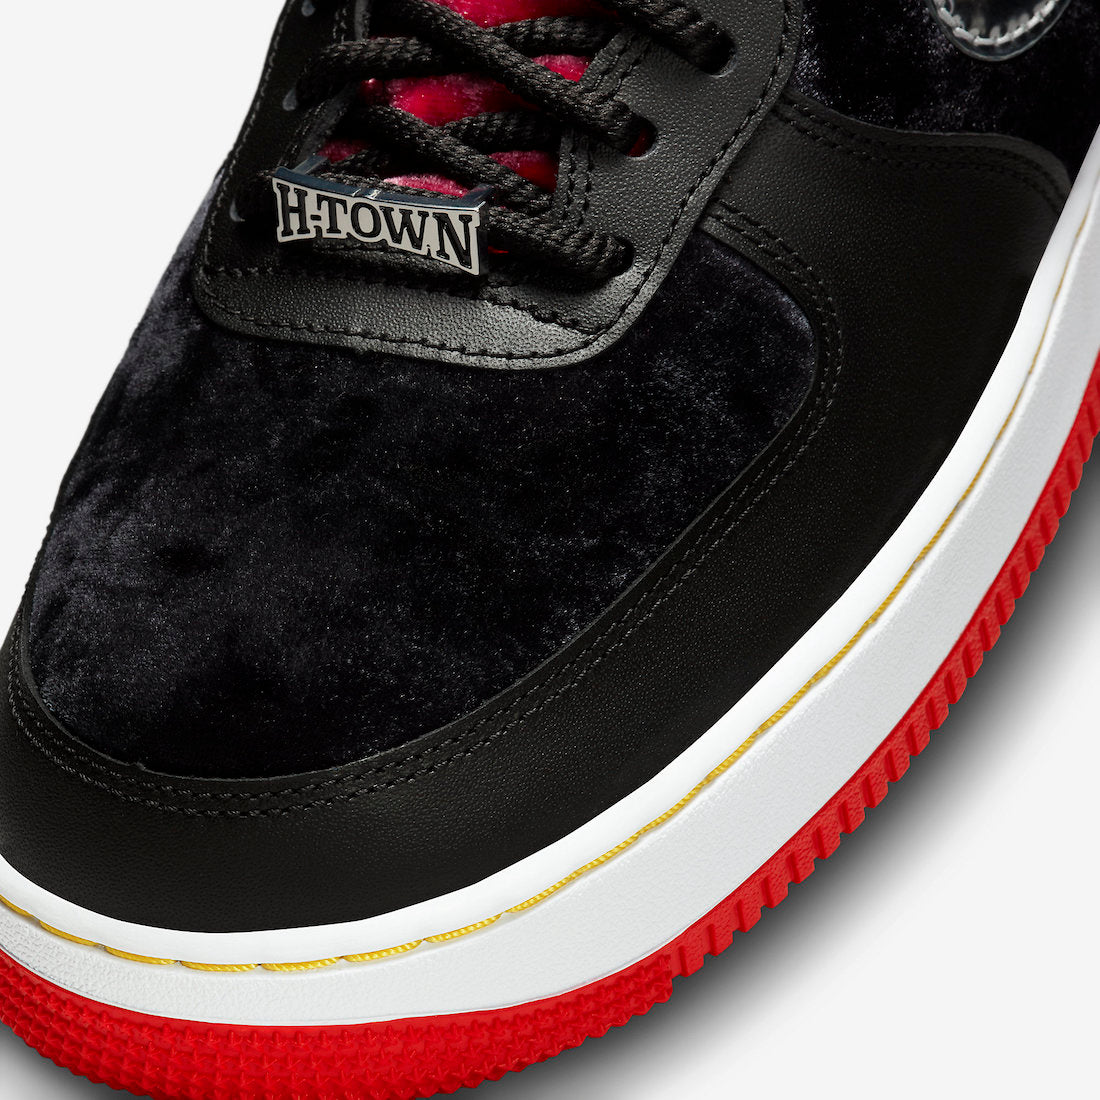 Nike Air Force 1 Low “Houston”